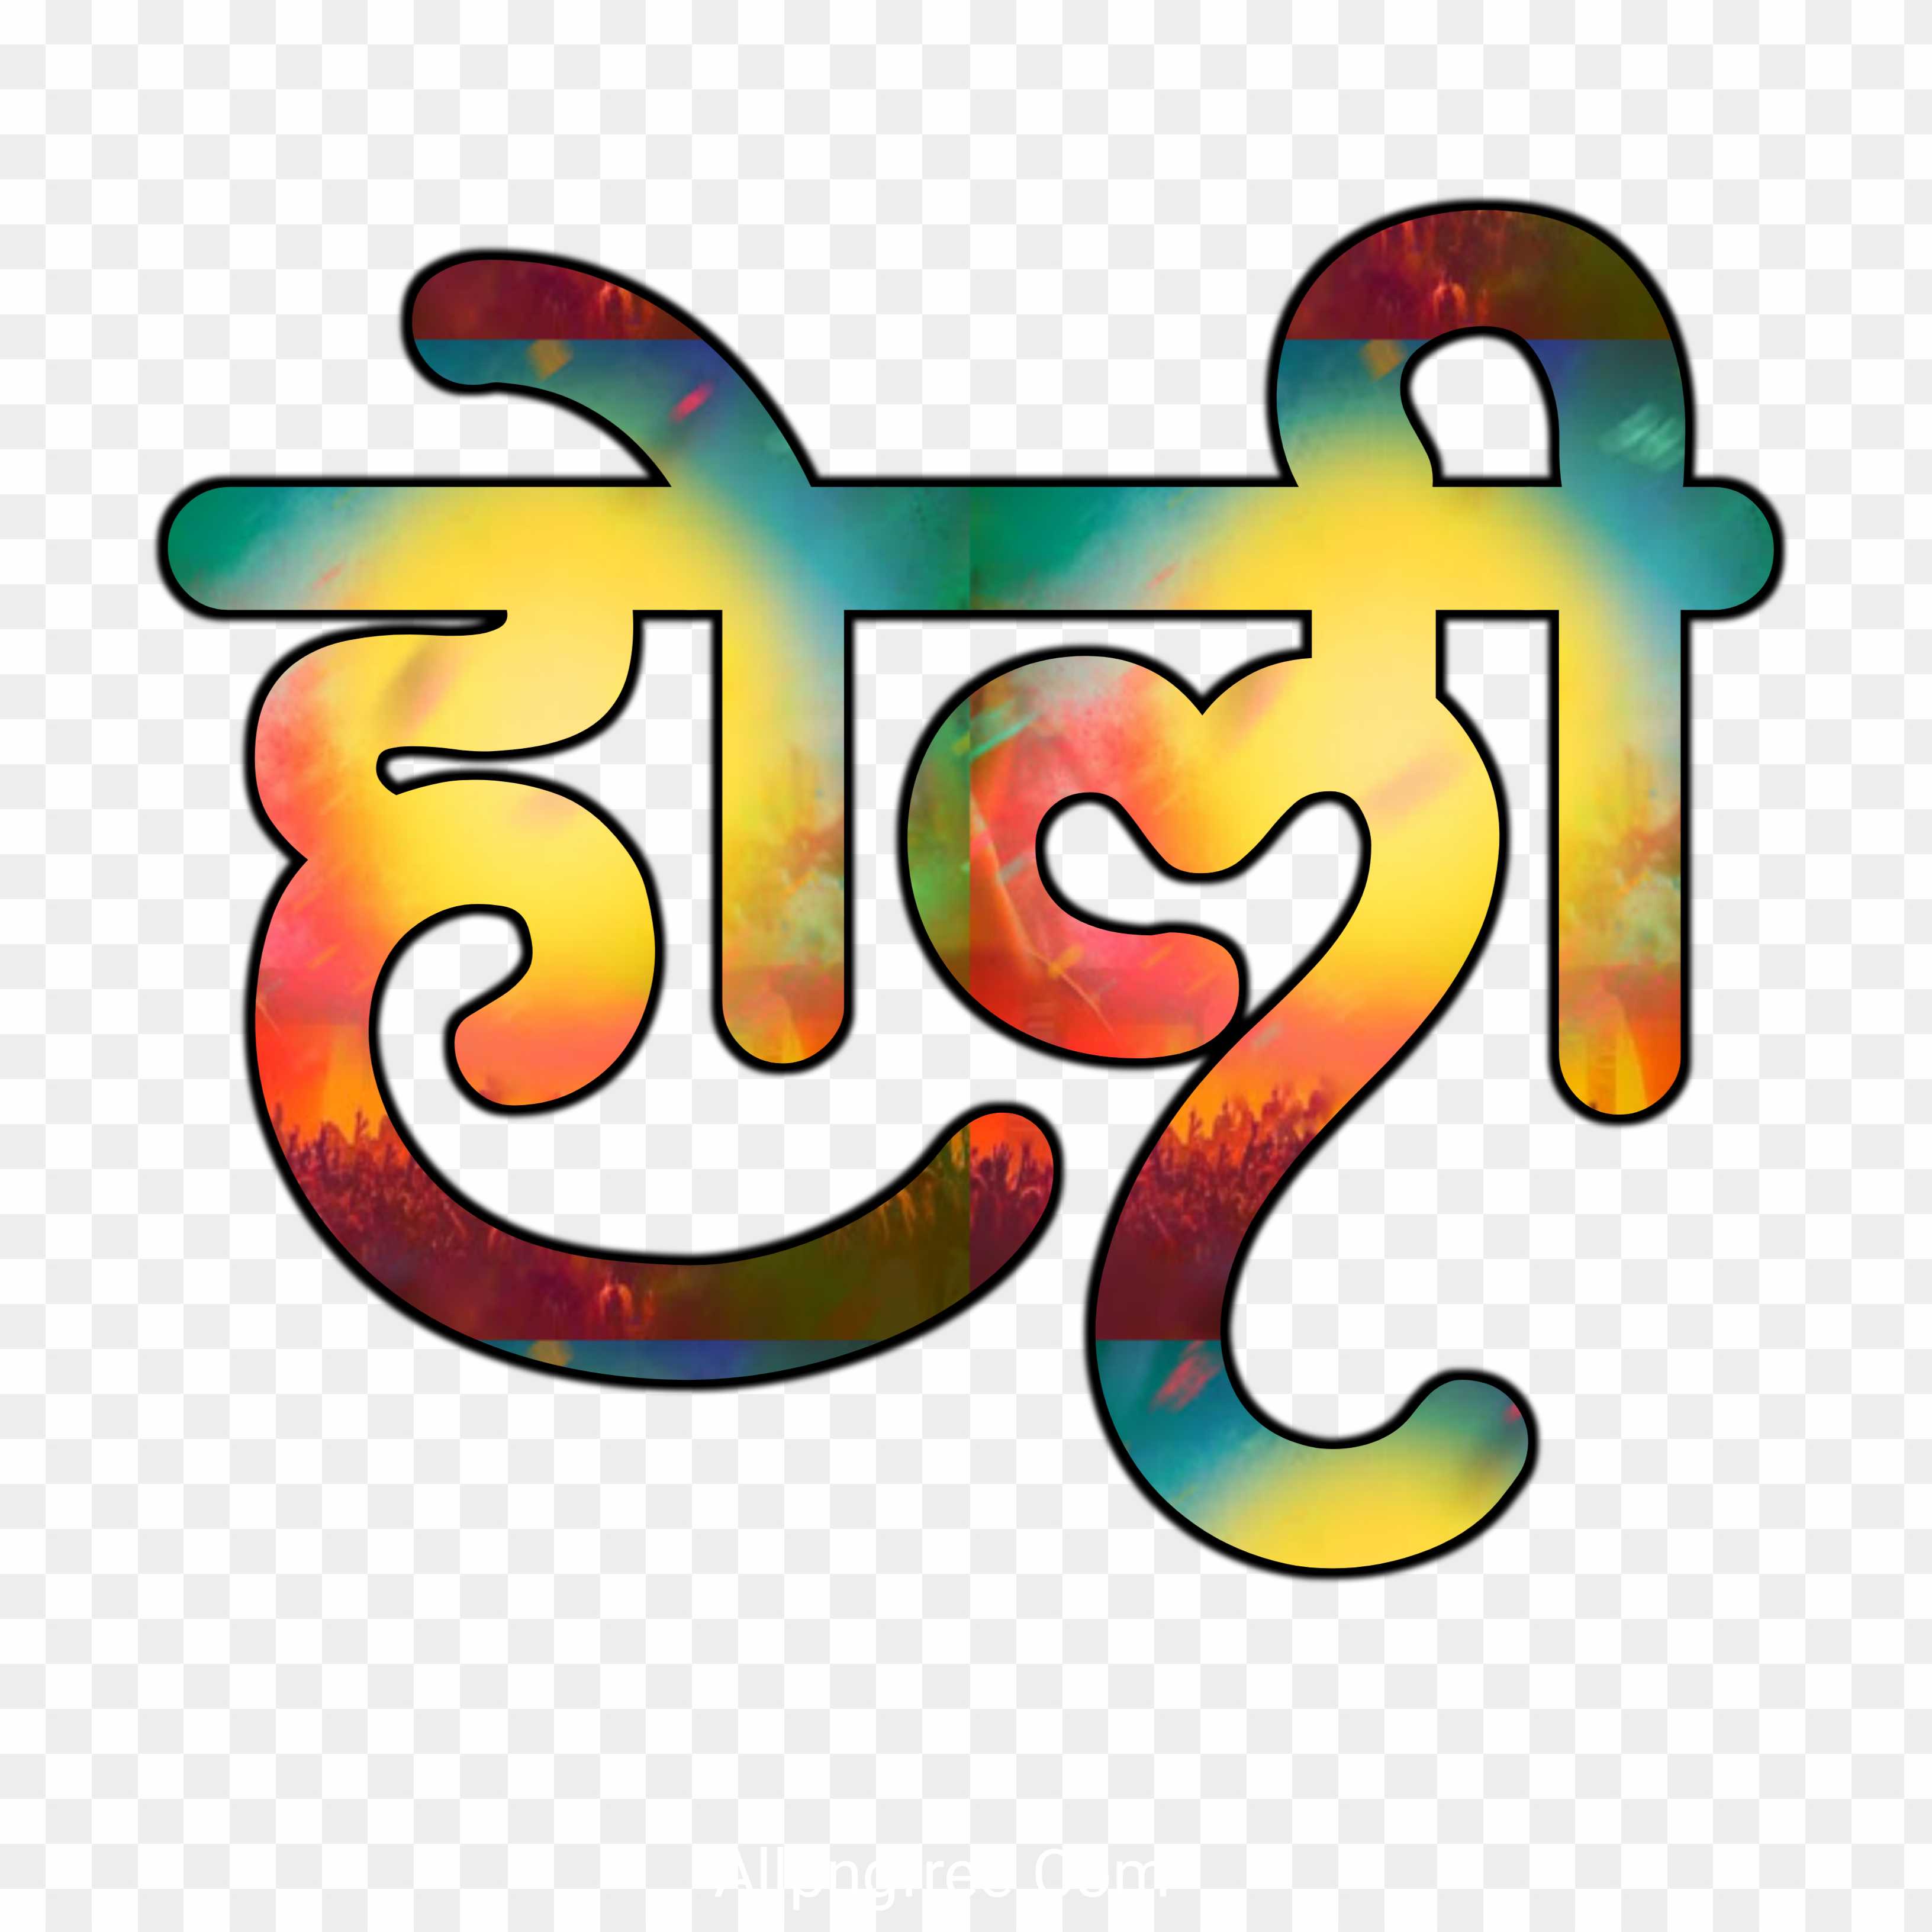 Happy Holi in Hindi text png images 